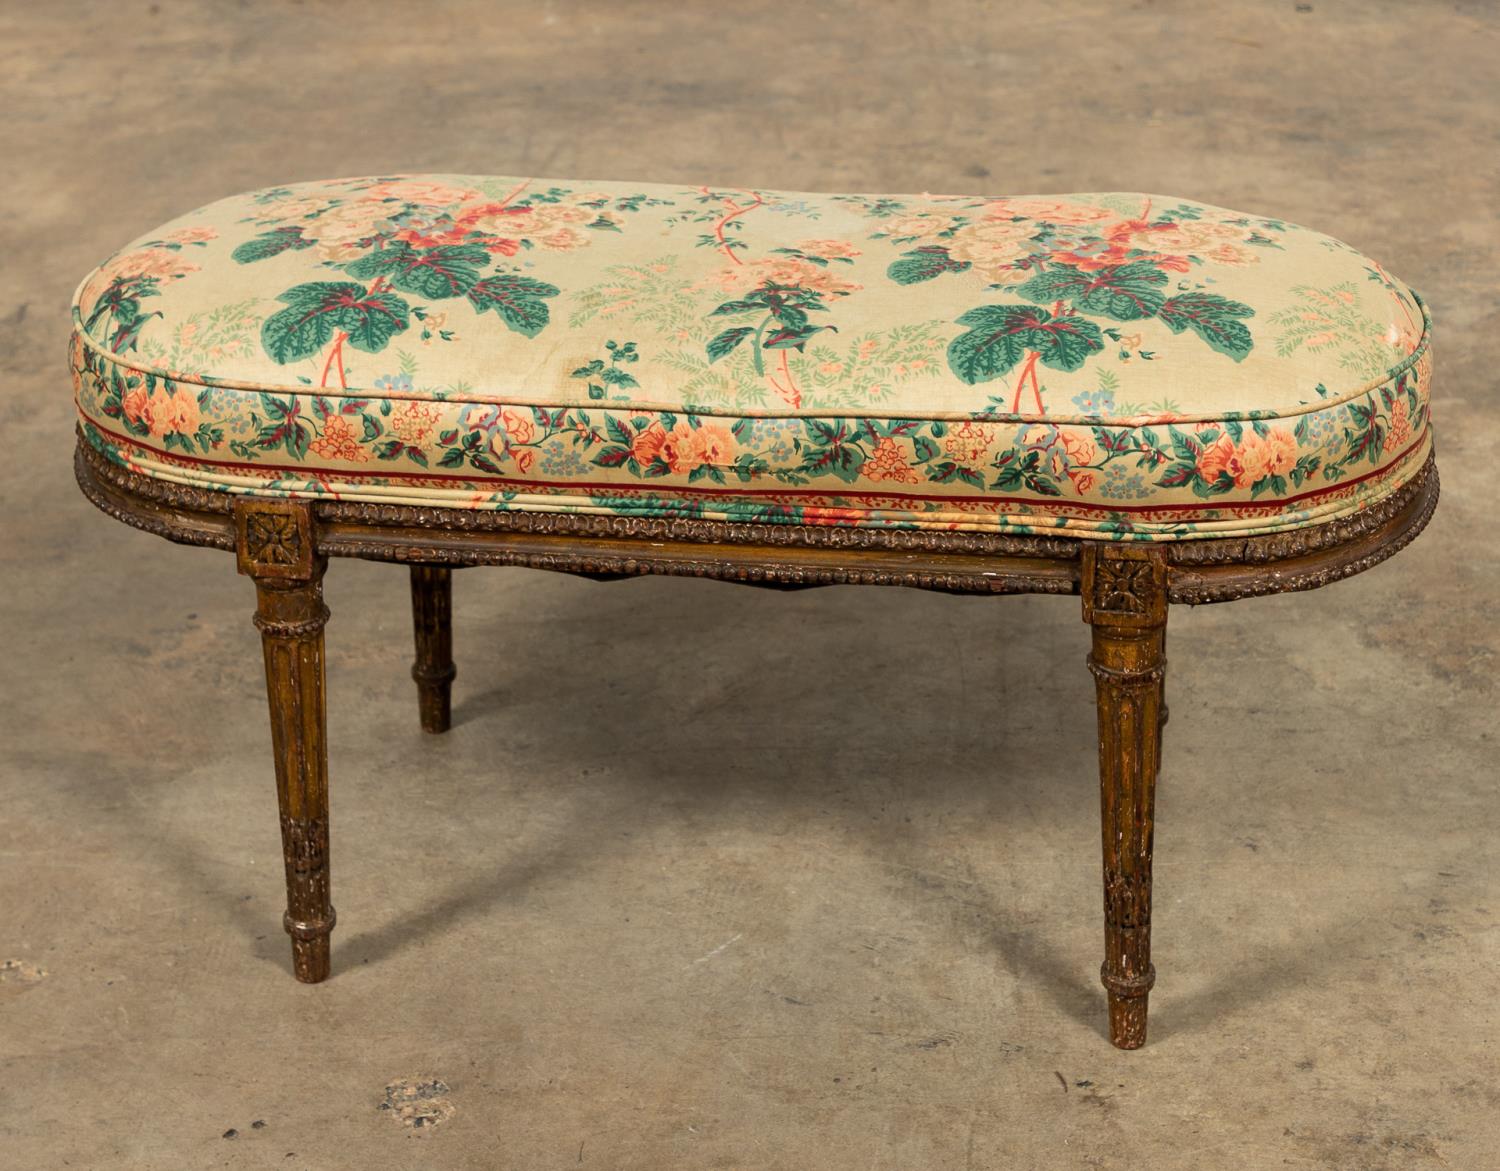 LOUIS XVI STYLE FLORAL UPHOLSTERED 35afad